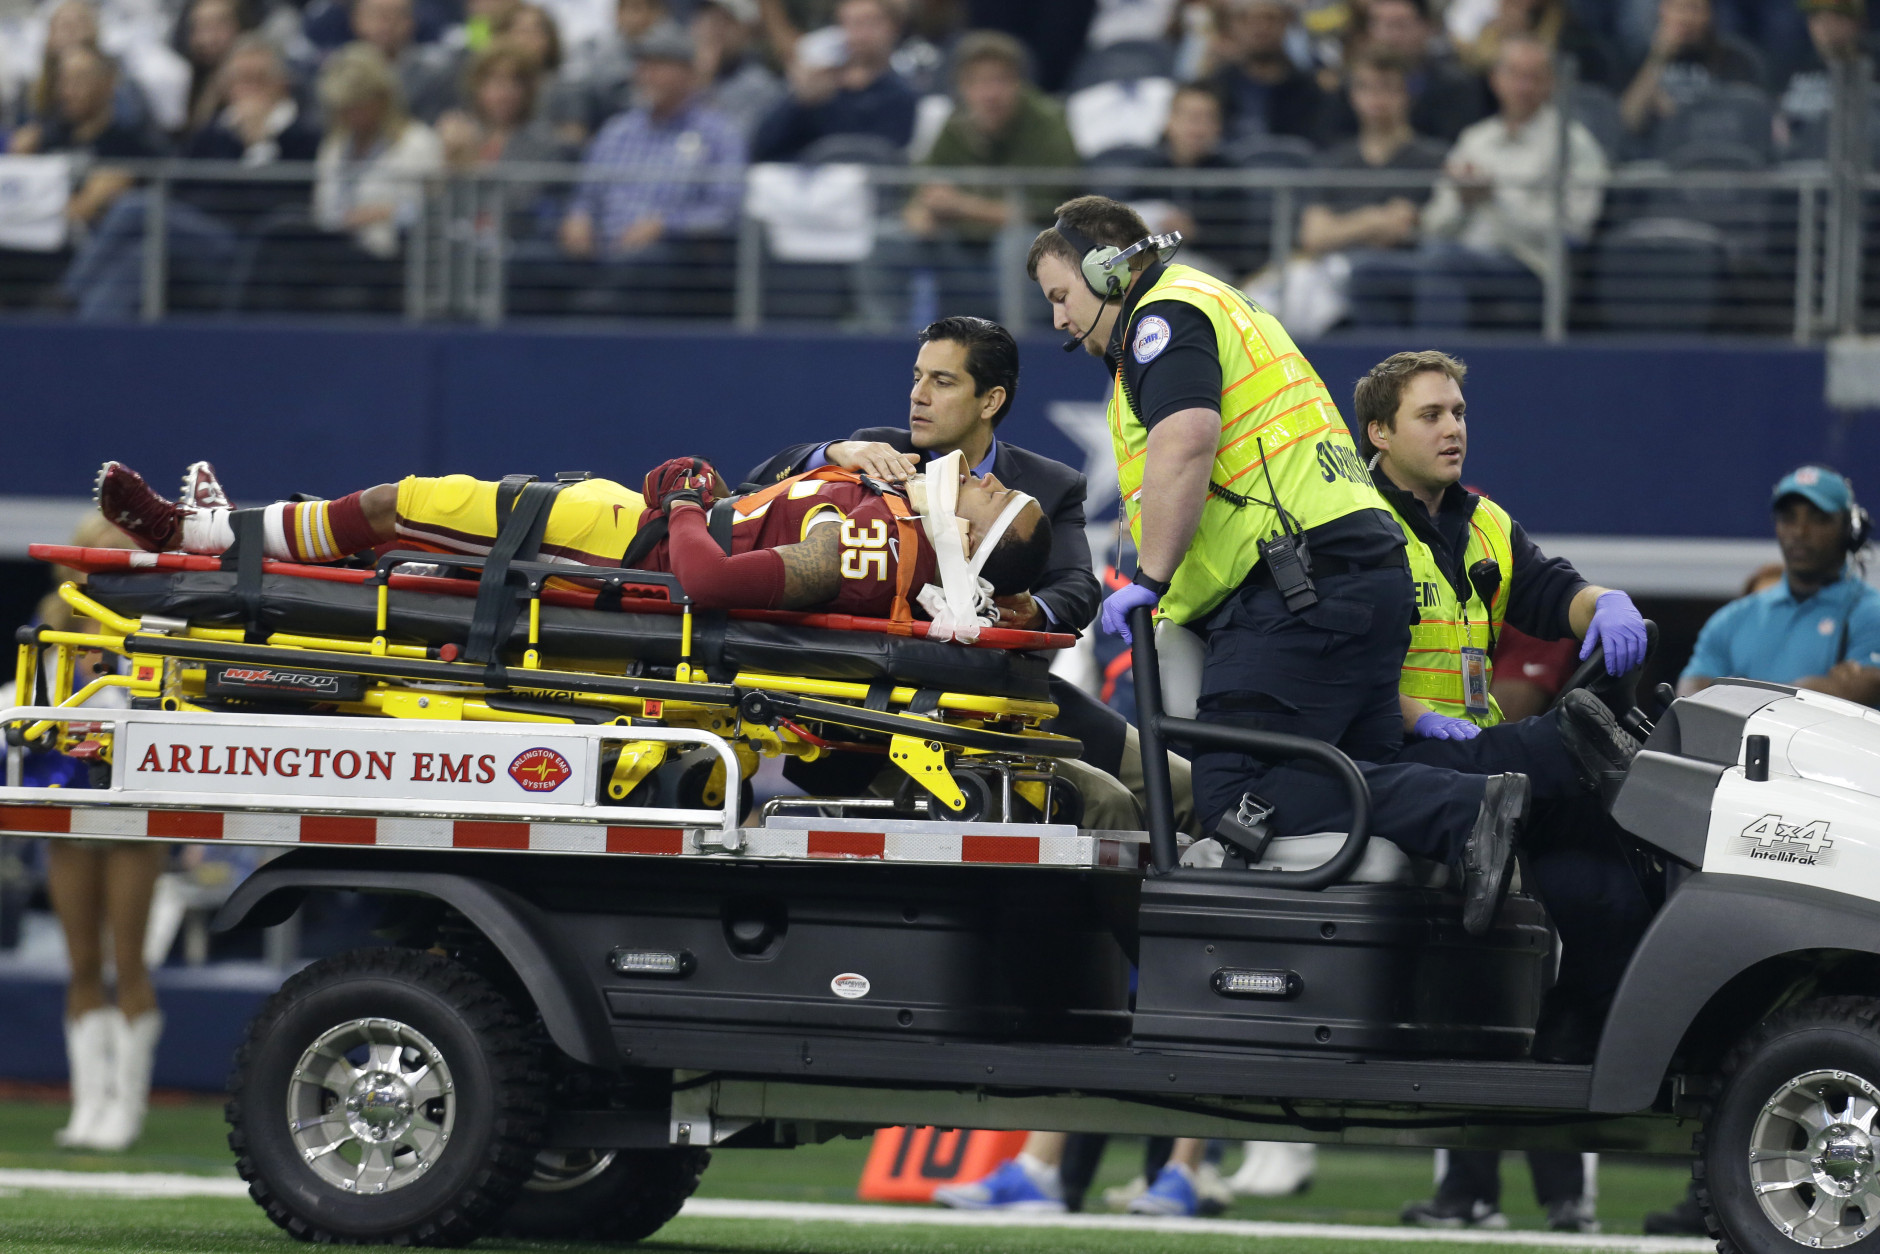 Washington Redskins defensive back Dashaun Phillips (35) is carted off the field by emergency personnel after suffering an unknown injury in the first half of an NFL football game against the Dallas Cowboys, Sunday, Jan. 3, 2016, in Arlington, Texas. (AP Photo/Tim Sharp)